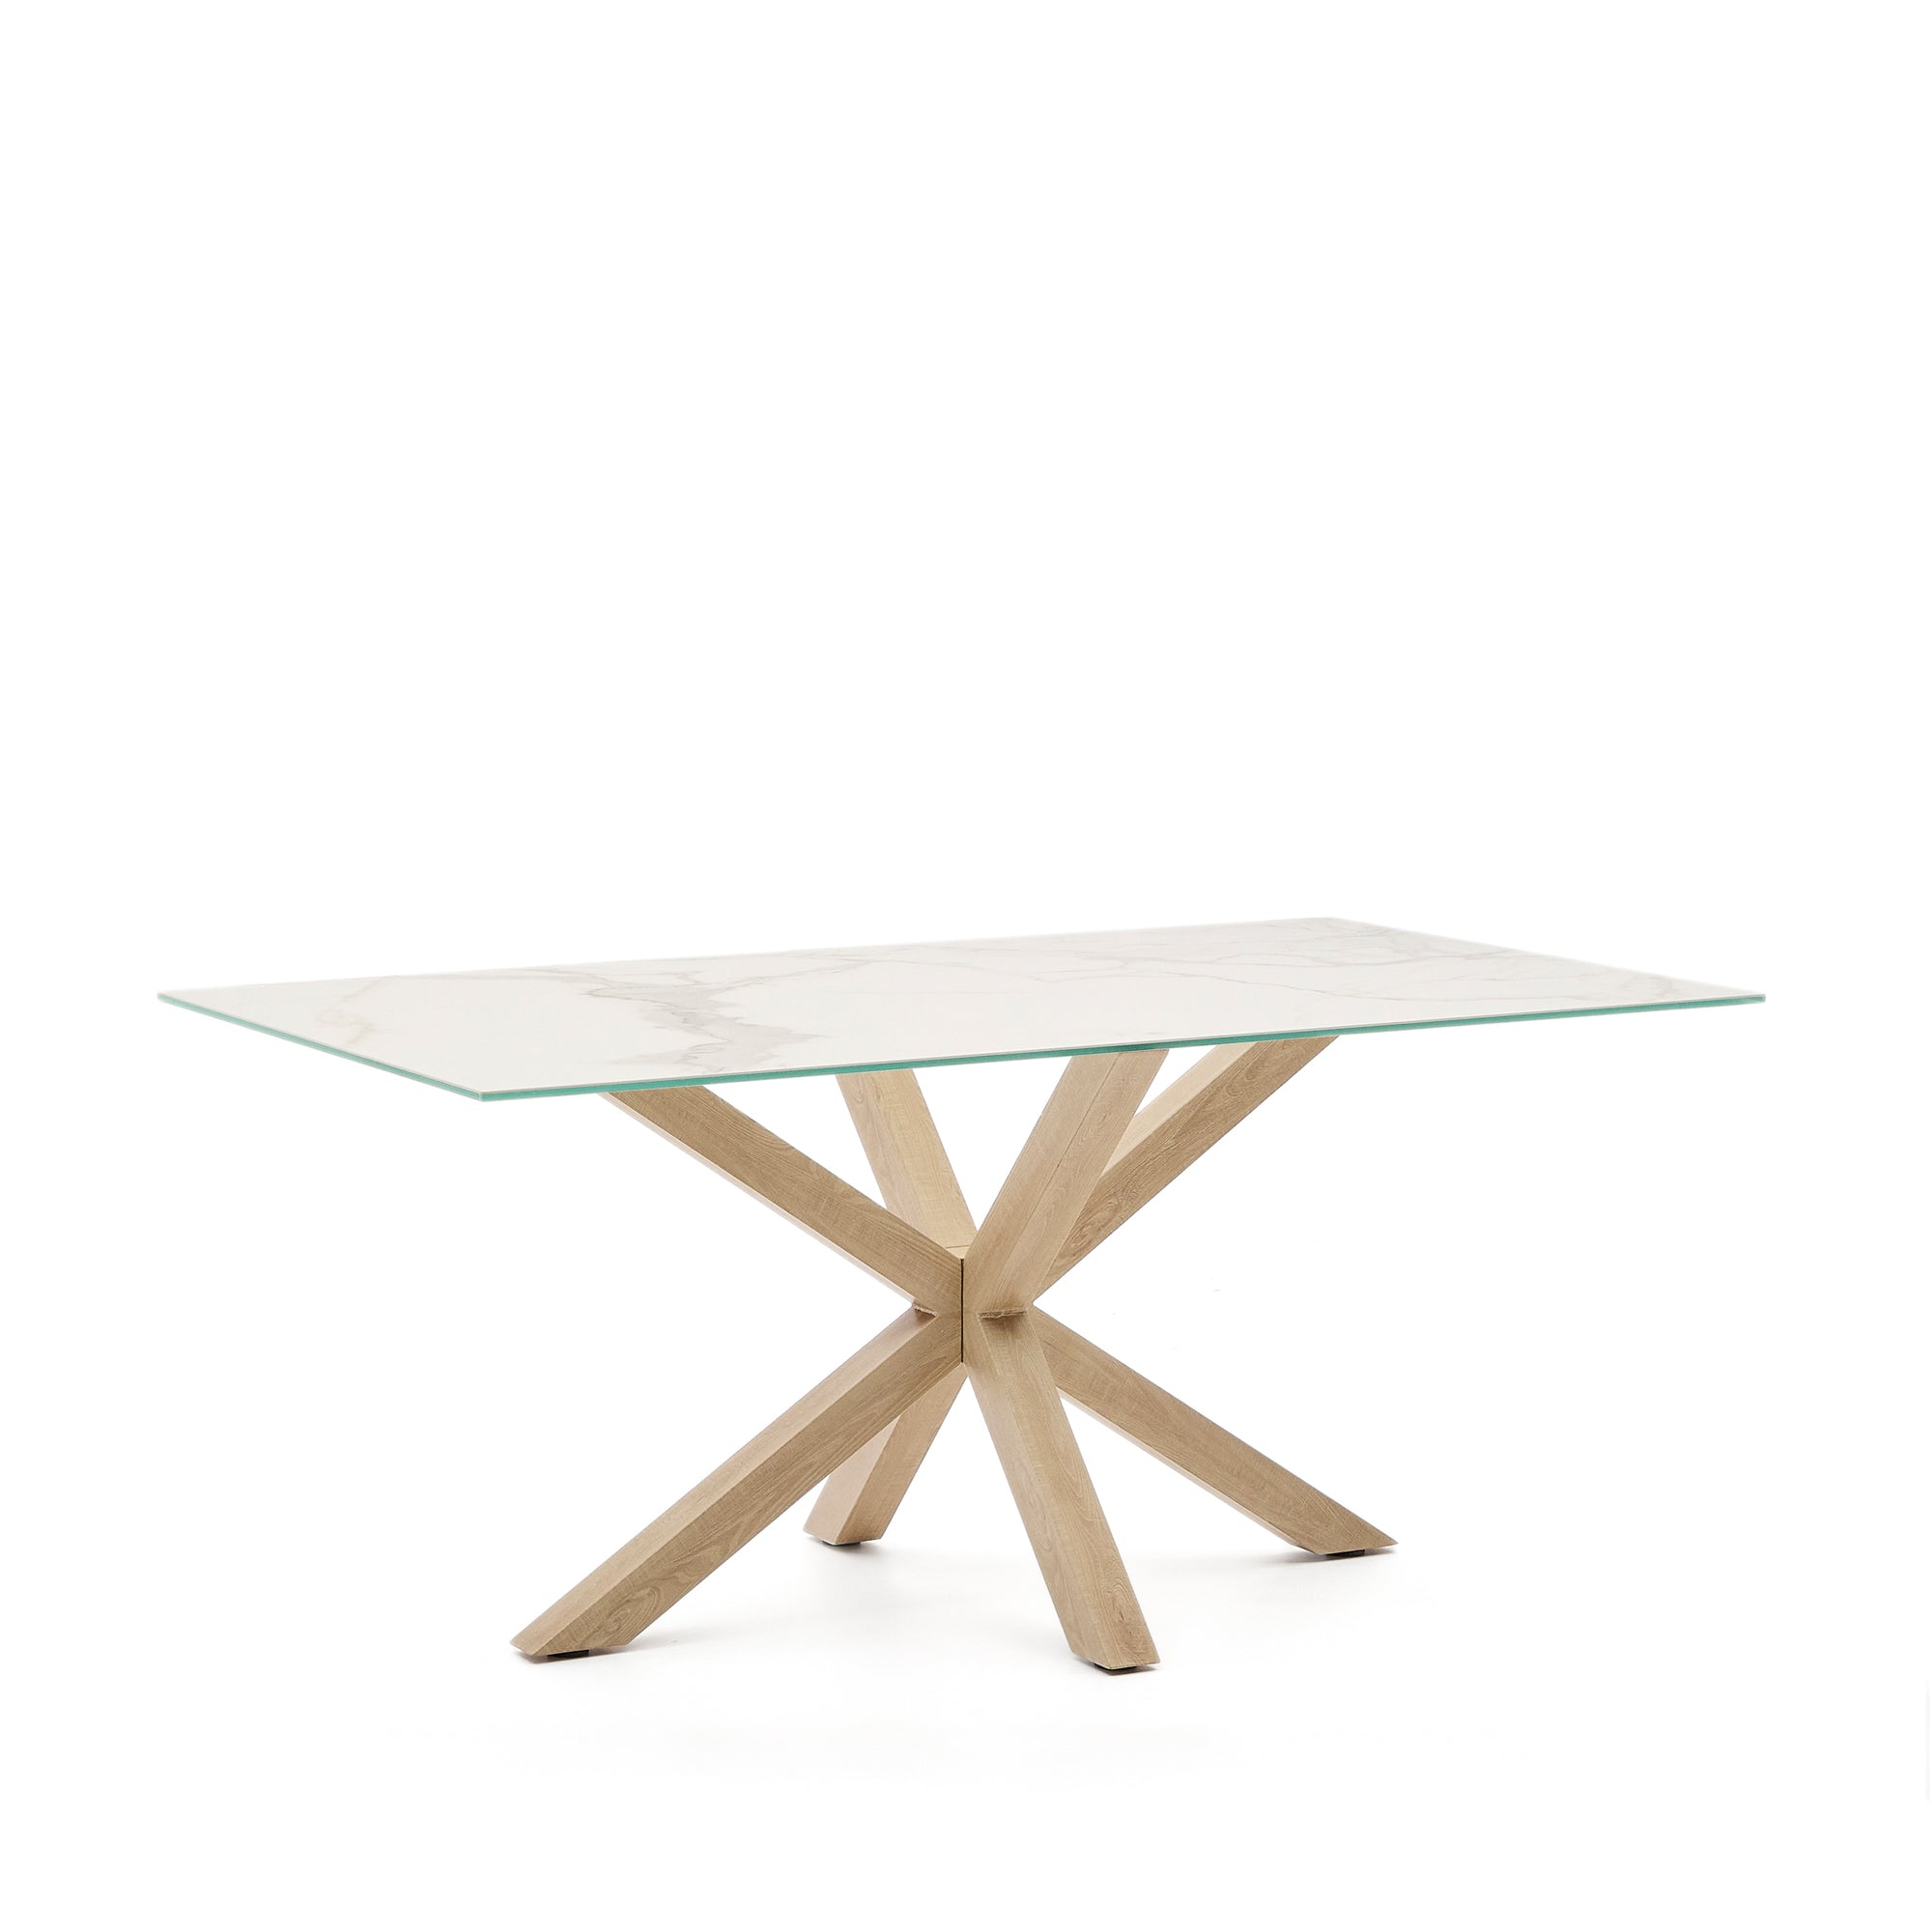 Argo porcelain table in white with steel wood effect legs 160 cm